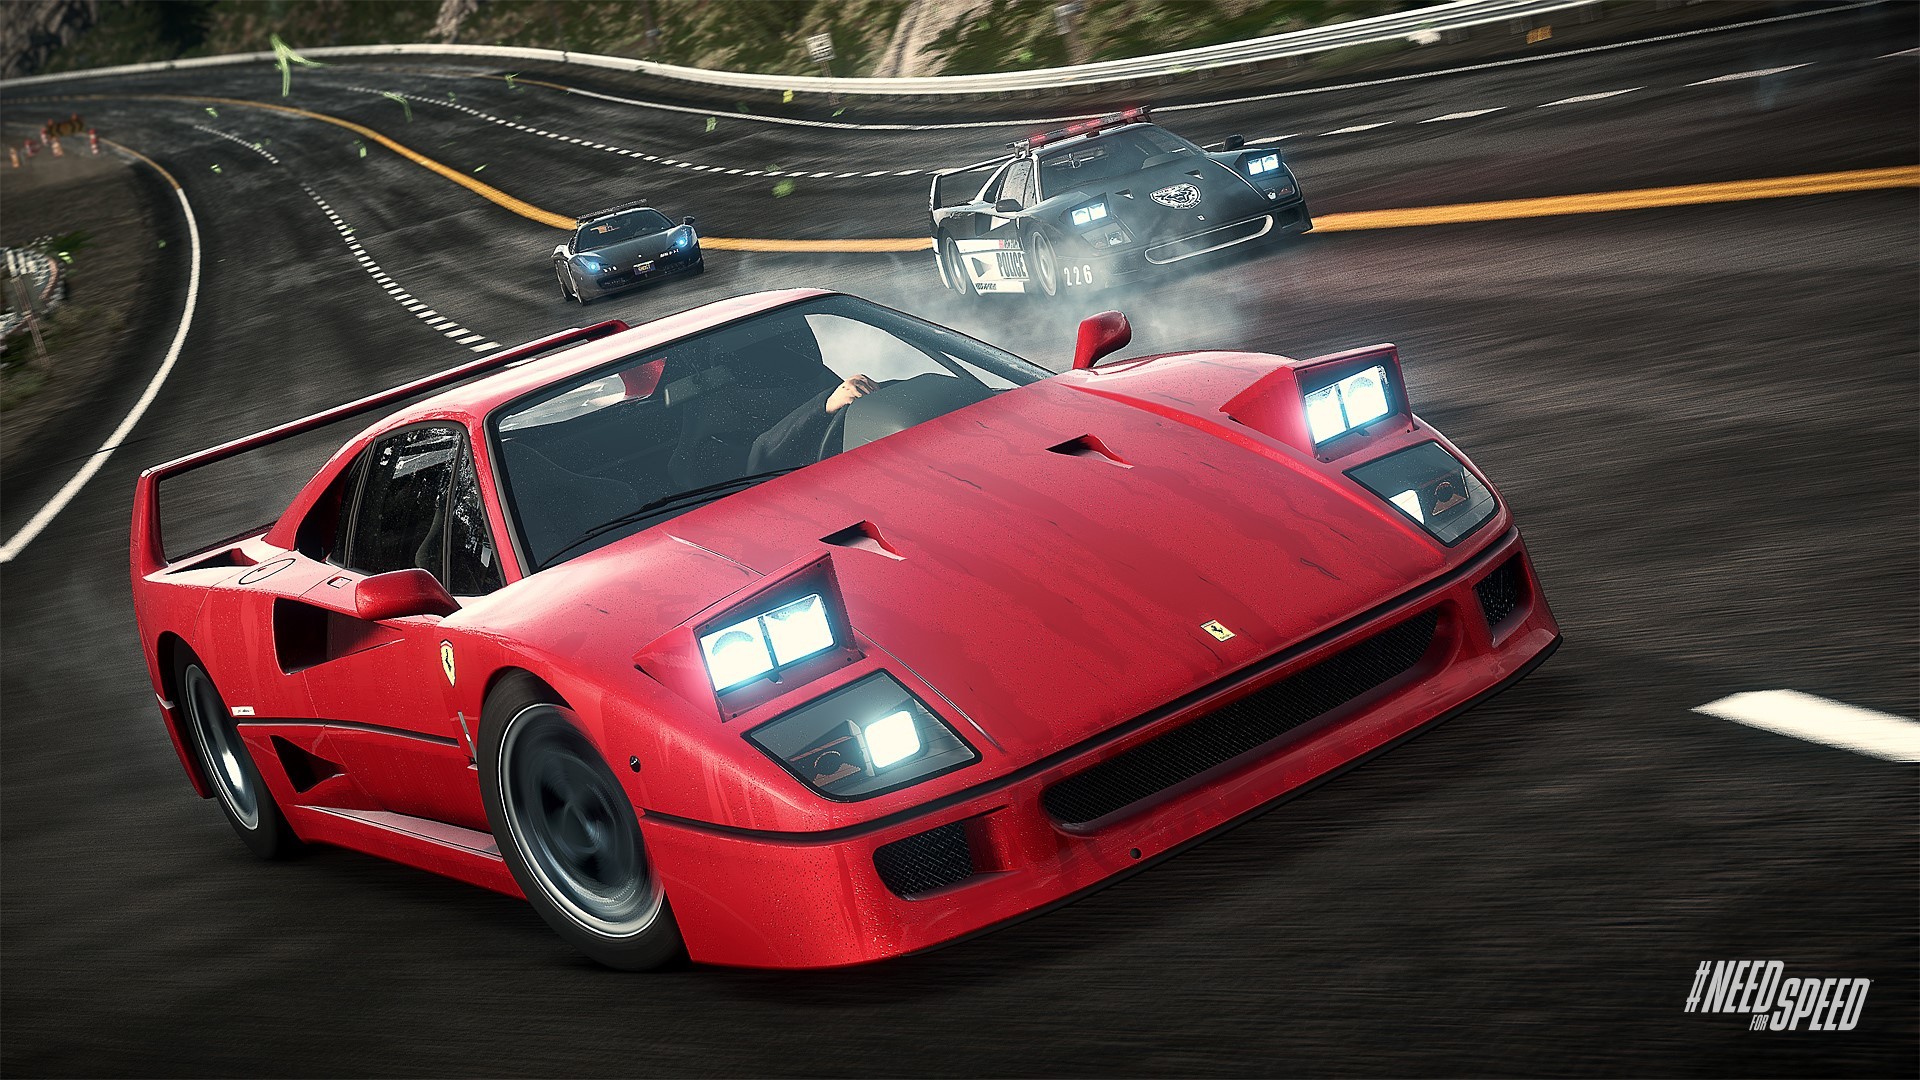 Wallpaper Need For Speed Rivals Highway Ferrari Pursuit - Ferrari F40 Need  For Speed Rivals - 1920x1080 Wallpaper 